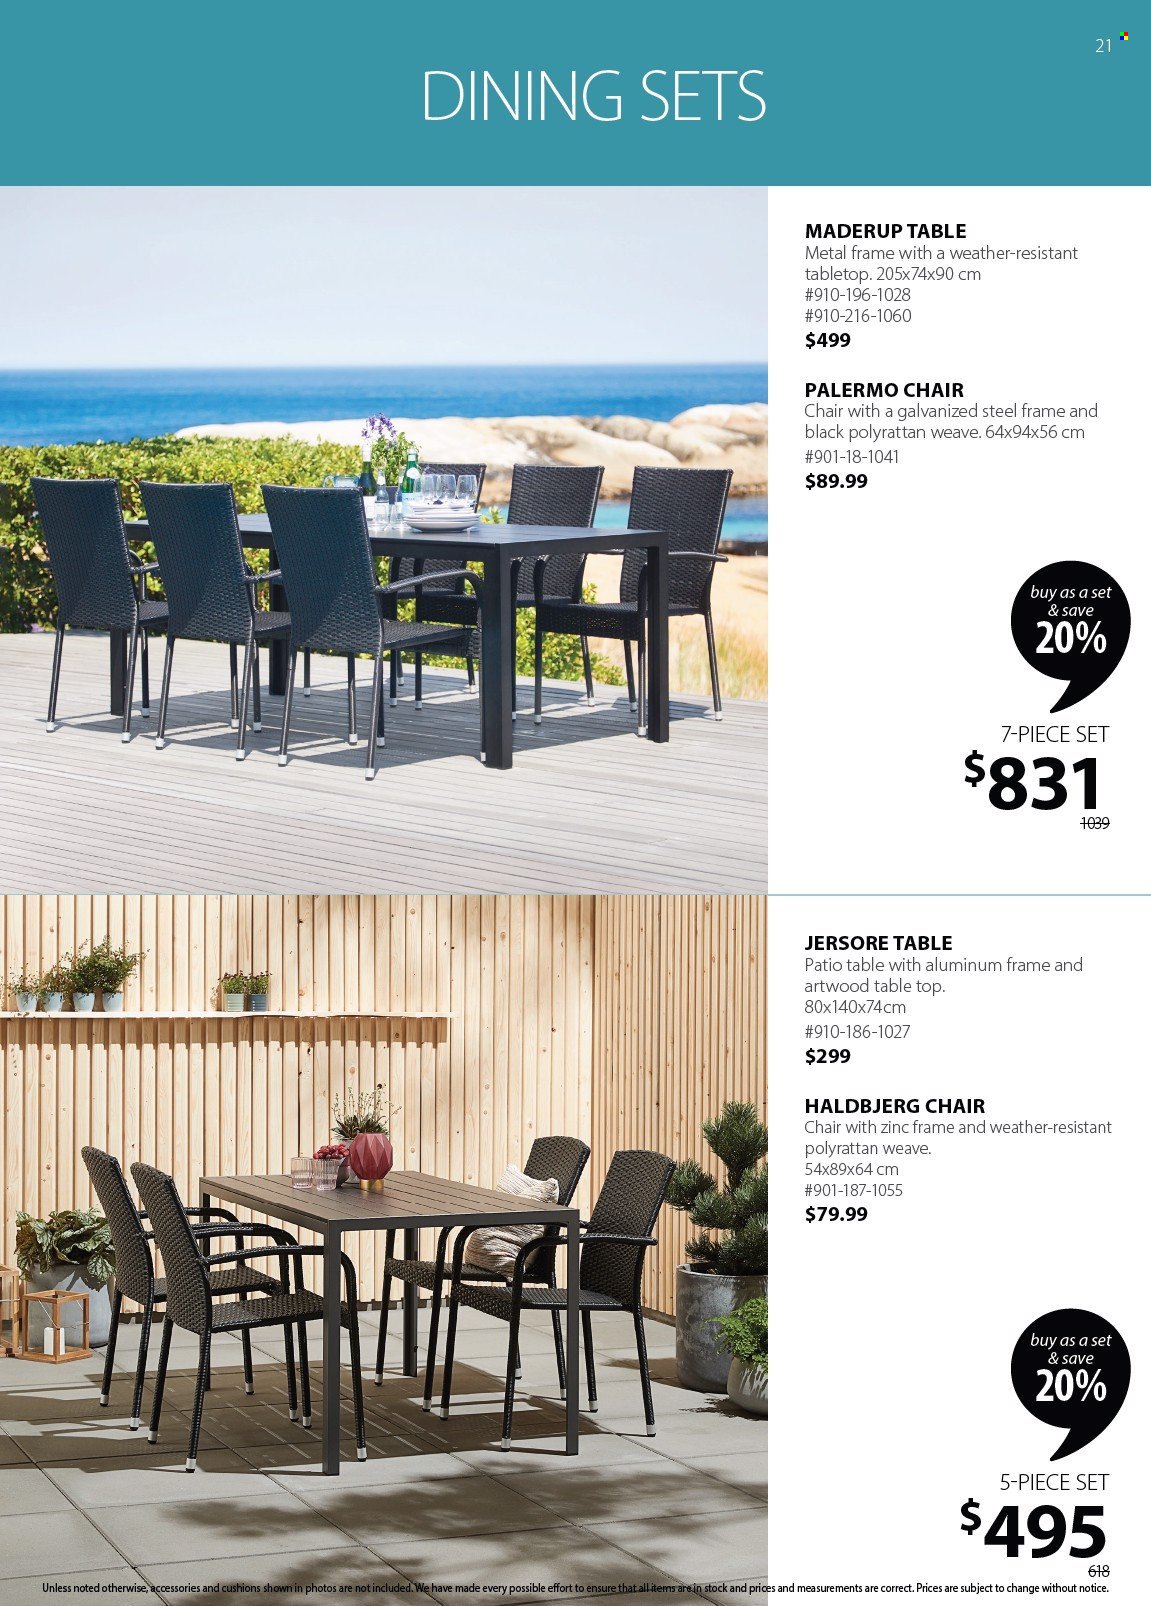 thumbnail - JYSK Flyer - Sales products - cushion, table, chair, metal frame. Page 21.